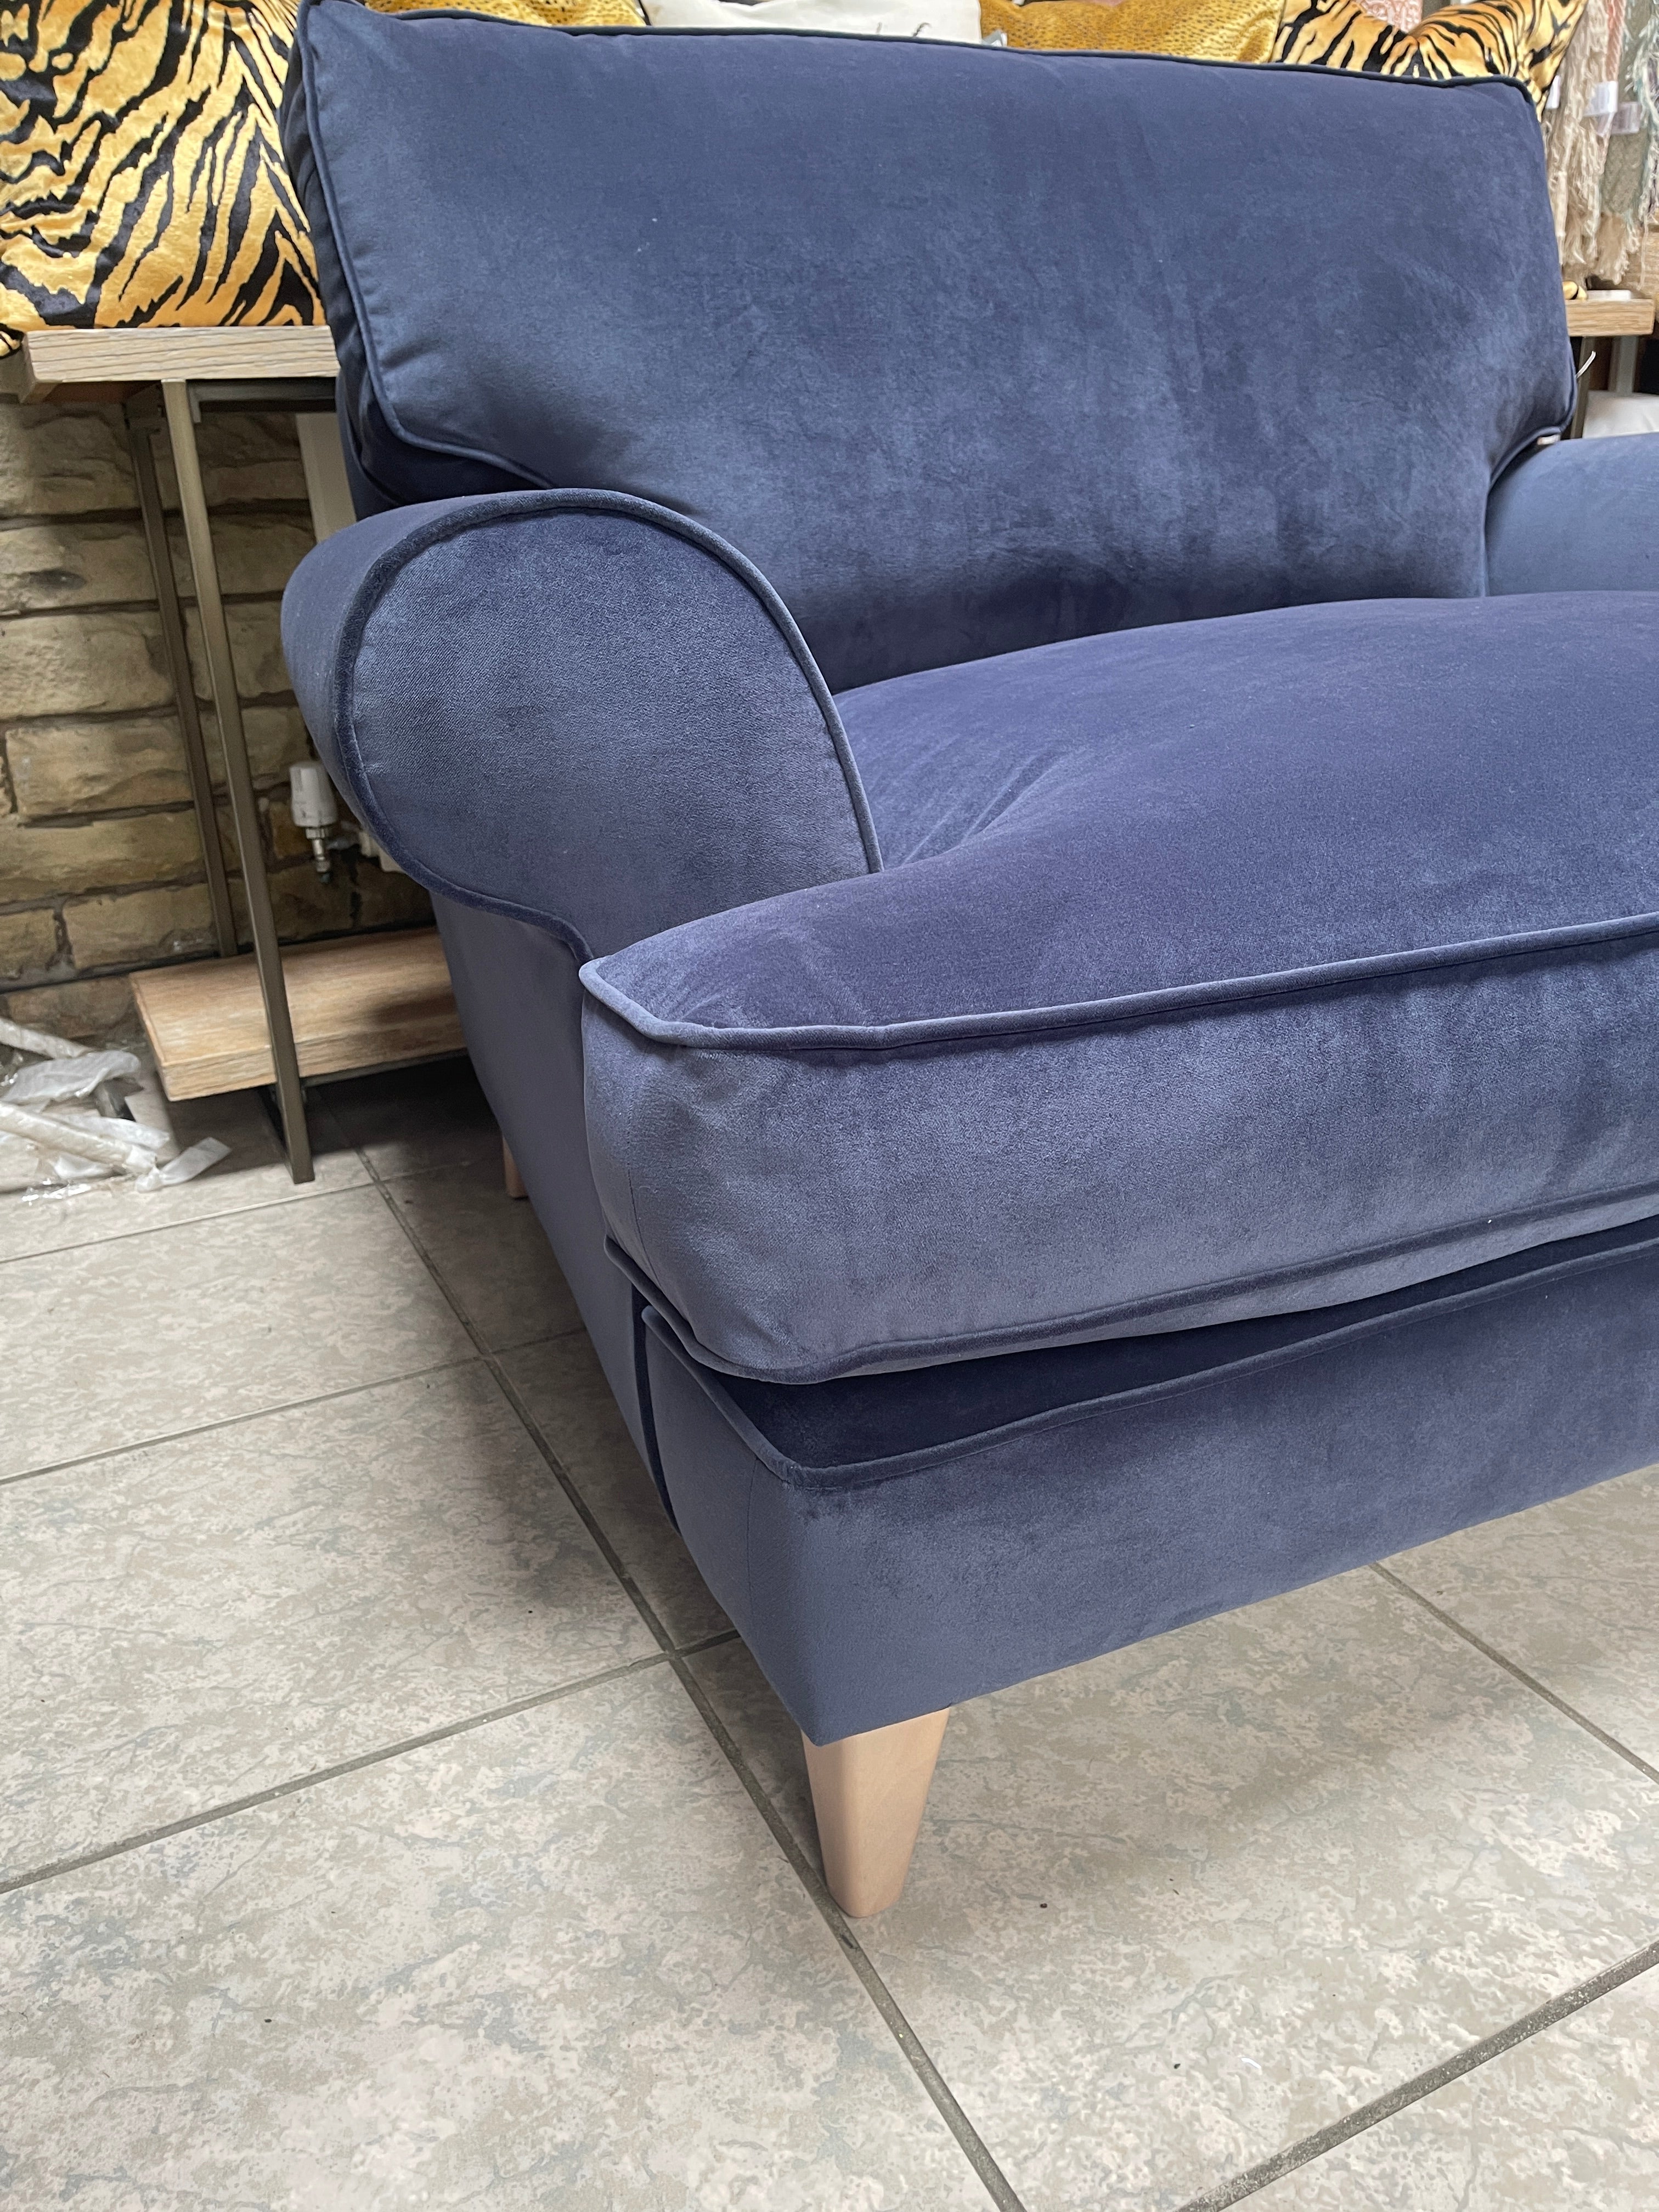 THE LOUNGE COMPANY BRIONY large style loveseat in royal blue velvet fabric